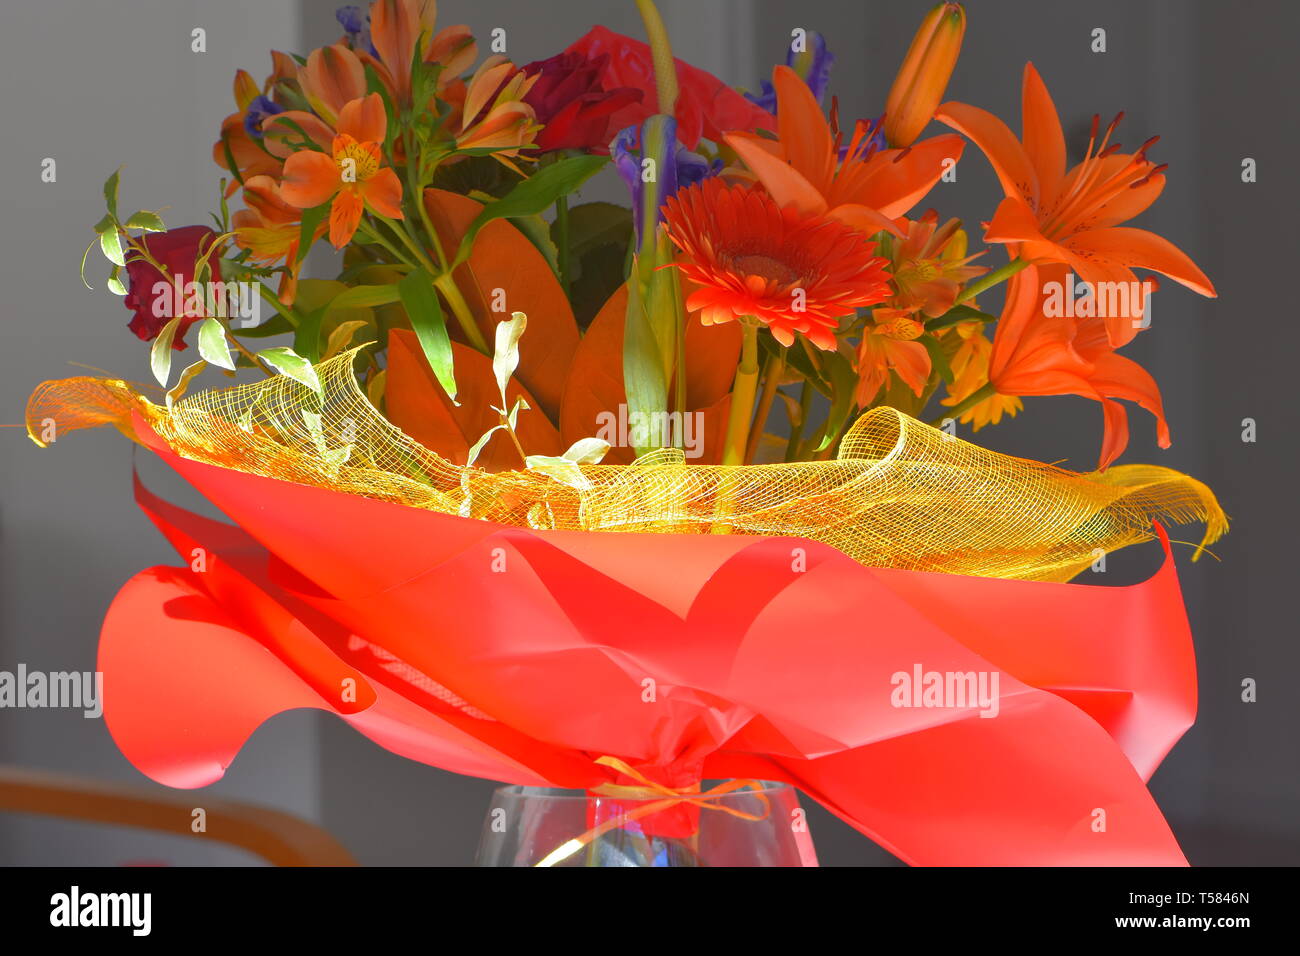 Colorful bouquet of various flowers in yellow mesh and red paper on gray background. Stock Photo